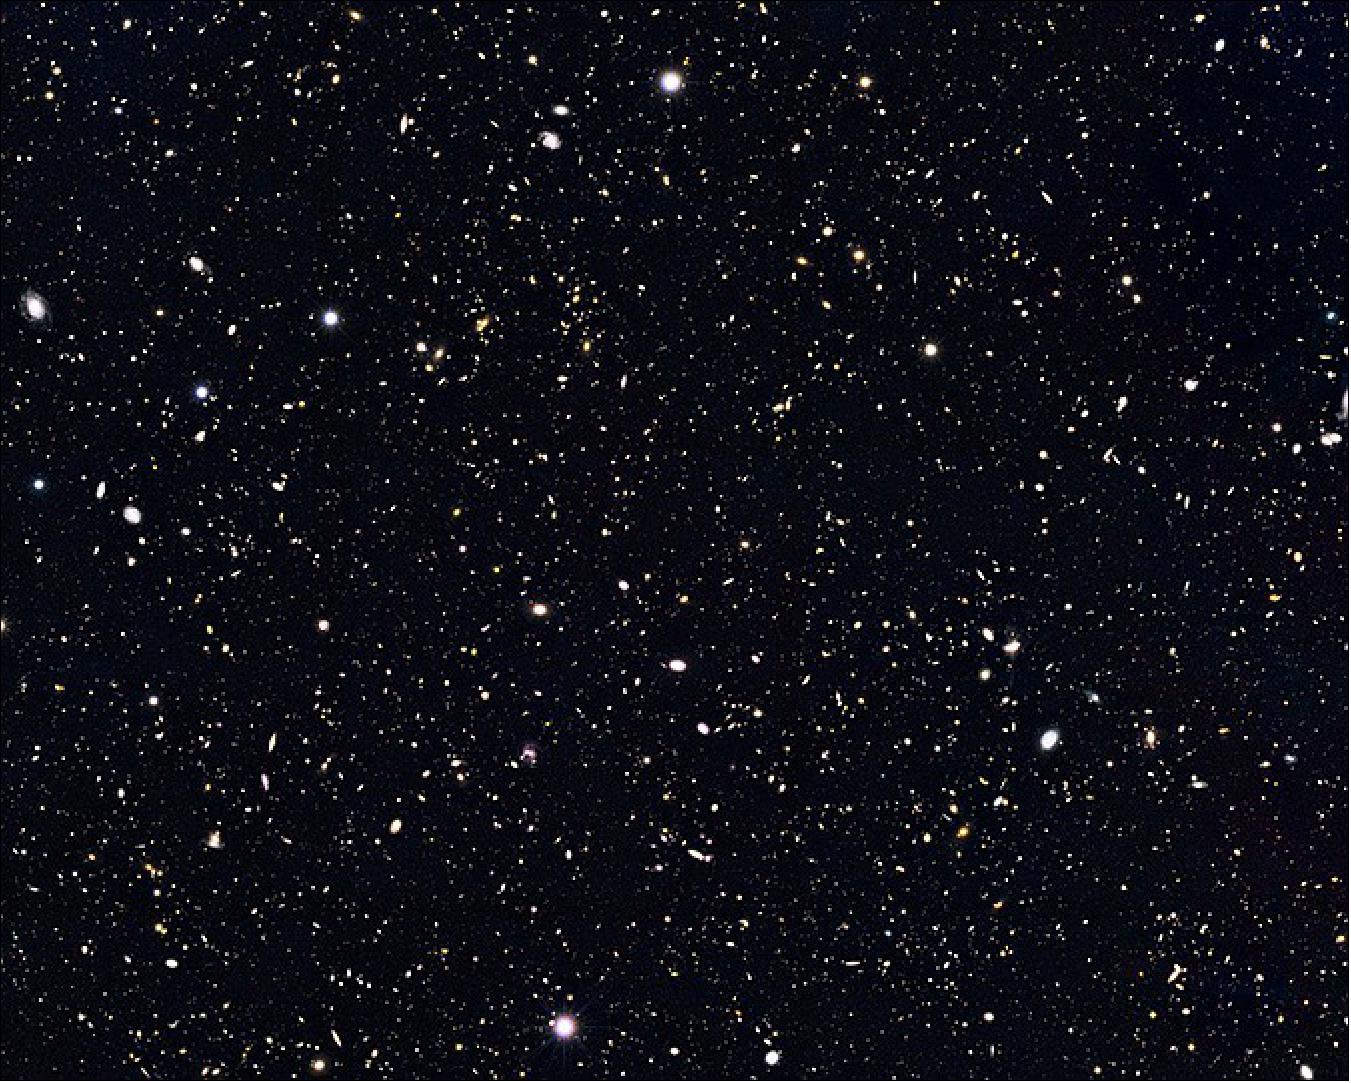 Figure 18: Image of the deep sky study by the Hubble Space Telescope, called GOODS-N (Great Observatories Origins Deep Survey - North) [image credit: NASA, ESA, G. Illingworth (University of California, Santa Cruz), P. Oesch (University of California, Santa Cruz; Yale University), R. Bouwens and I. Labbé (Leiden University), and the scientific team]